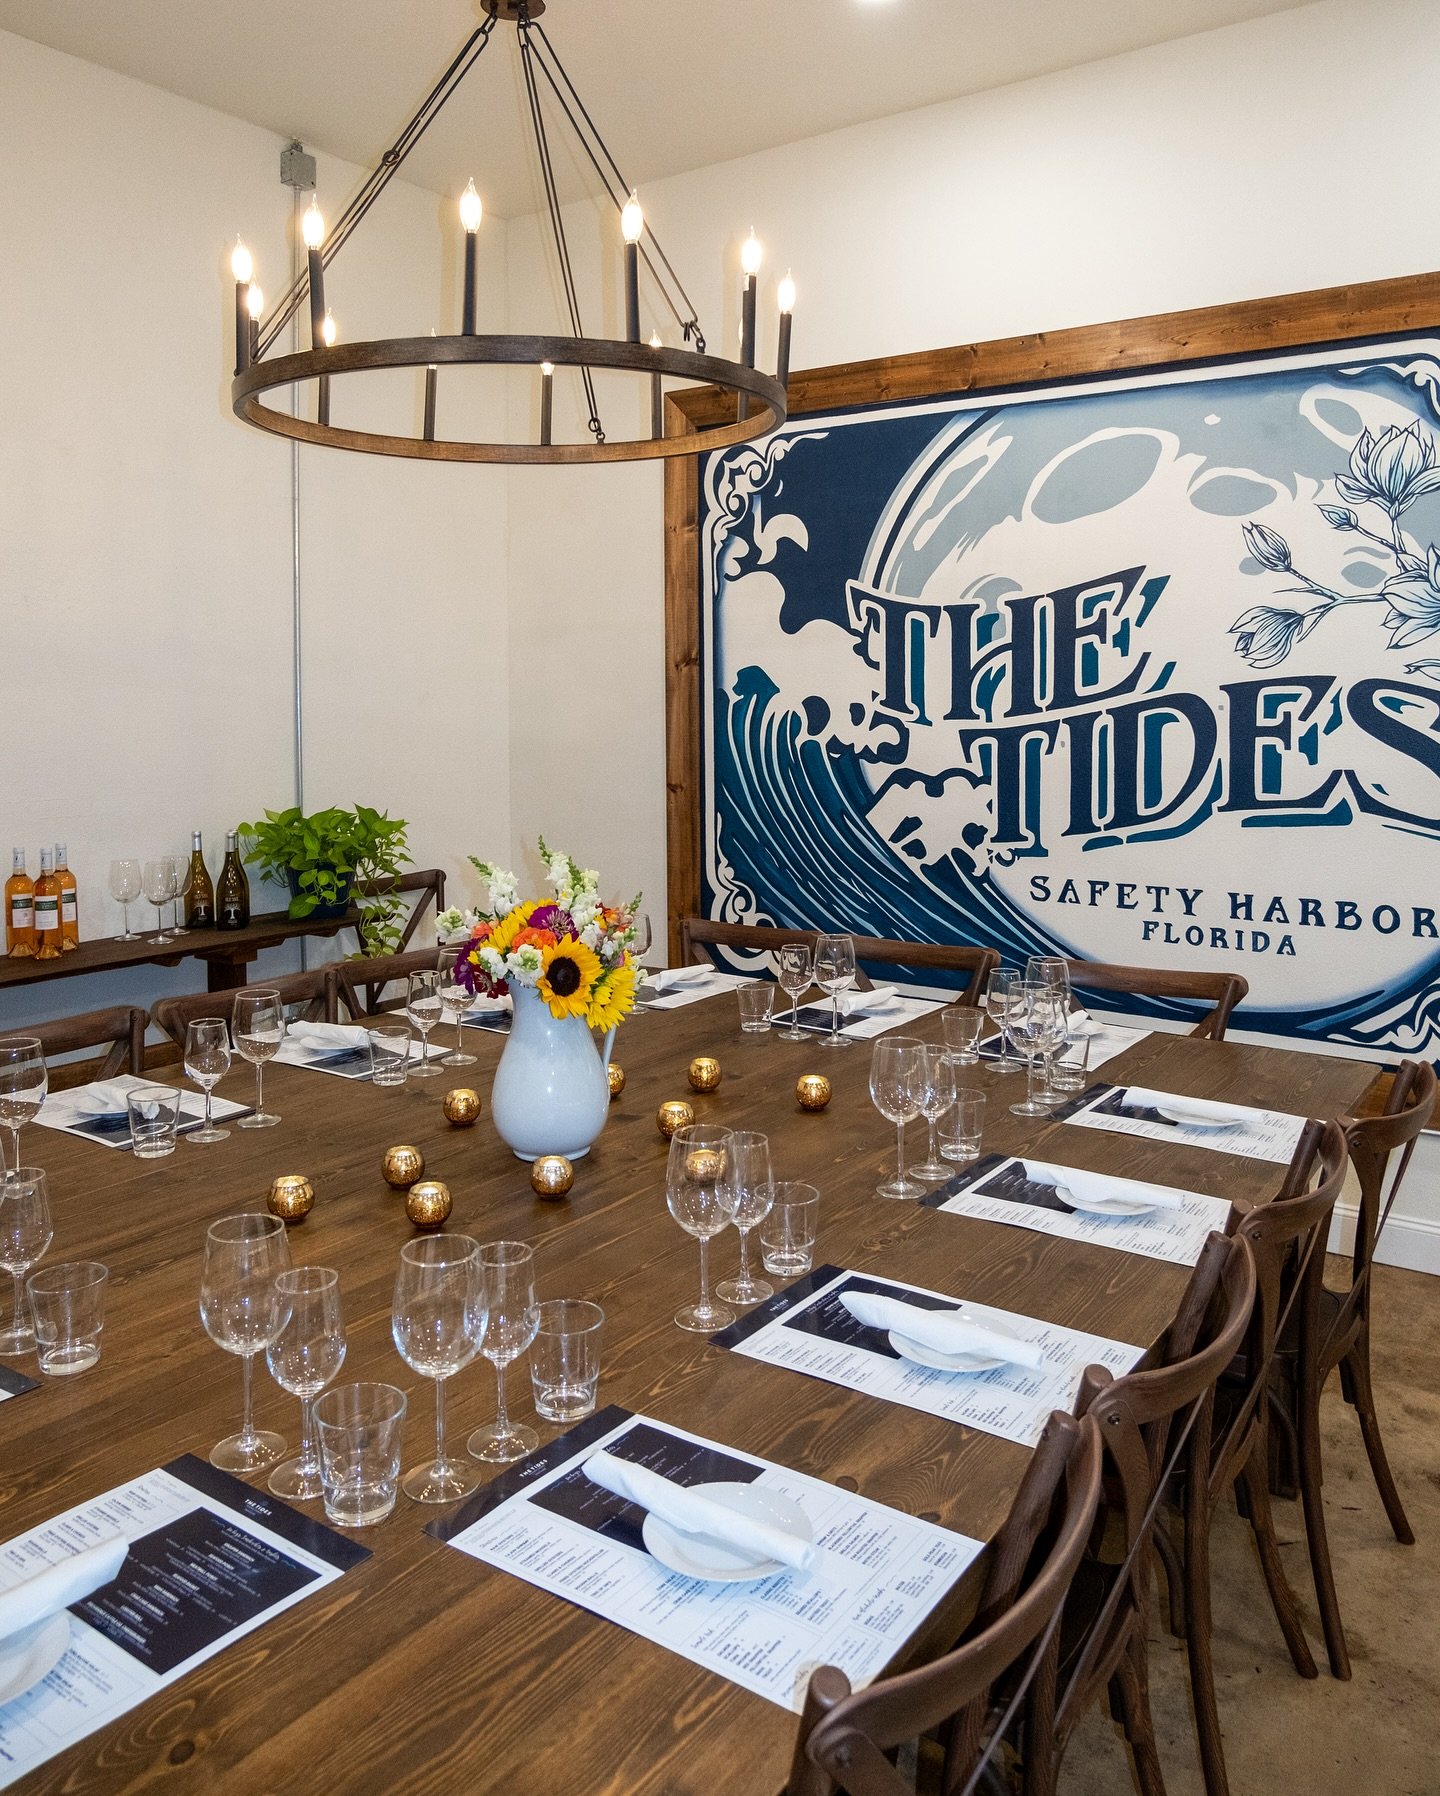 We have the perfect space for your next event! 🍾

Our semi-private dining area can comfortably sit up to 16 people and is perfect for large dinner parties and private events. We have special menu options available for private events including small 